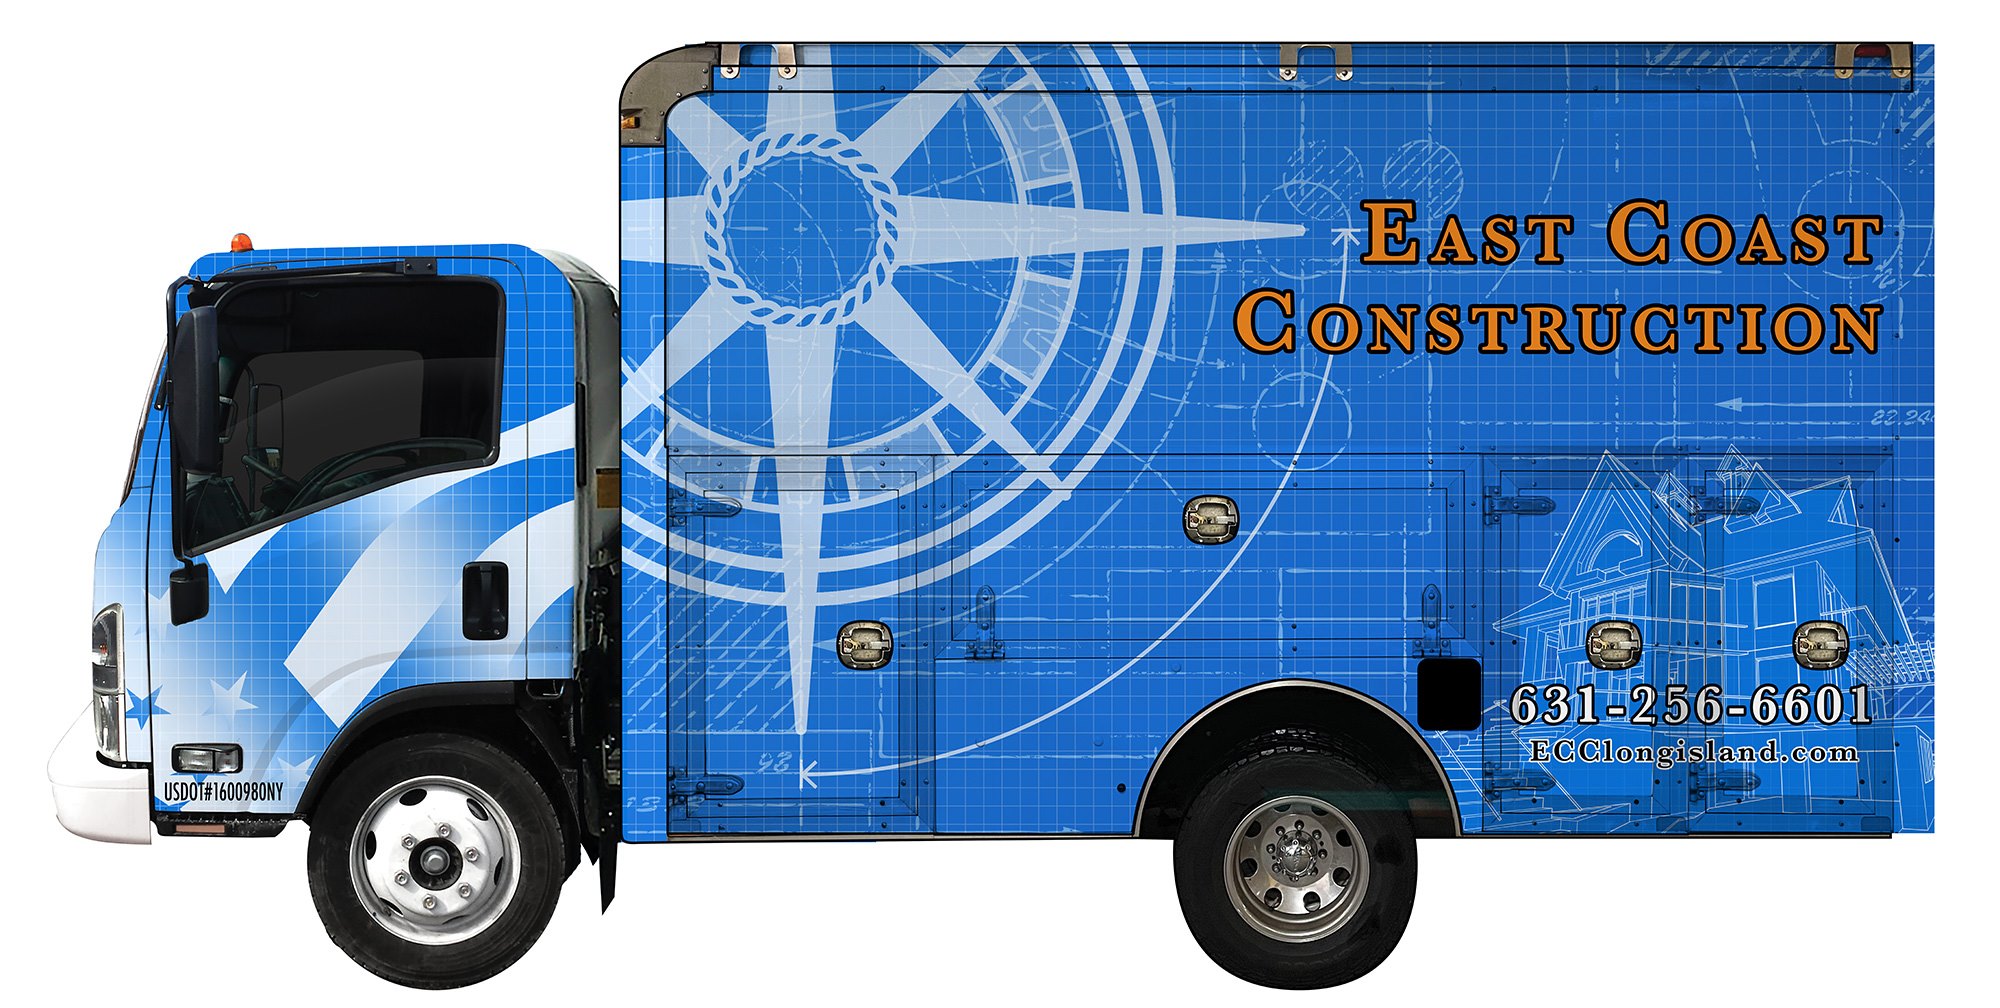 East Coast Construction & Contracting Services, Inc.